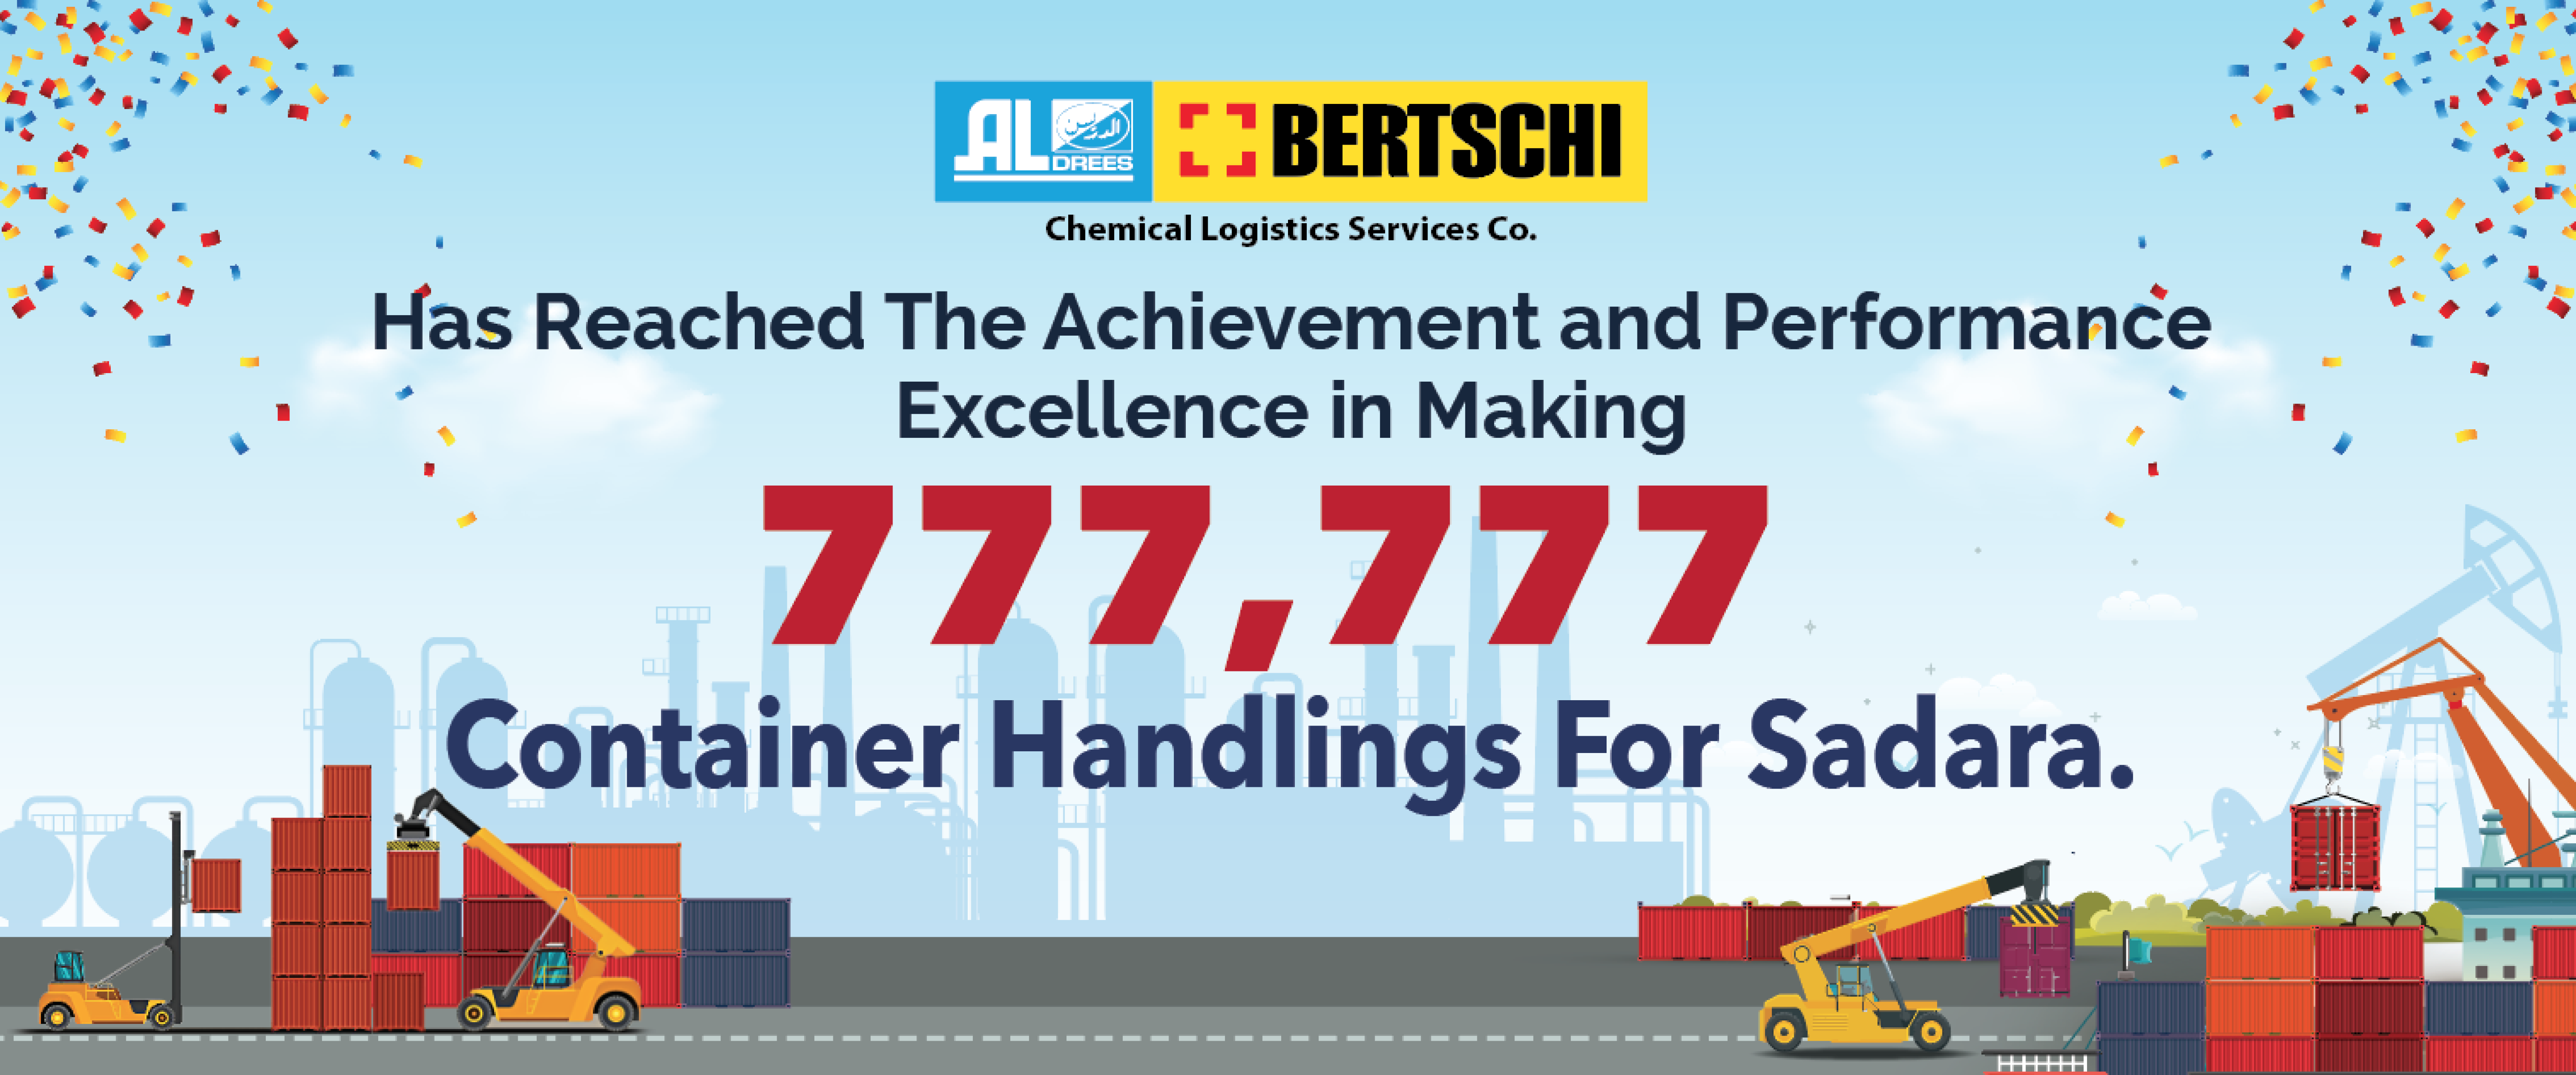 777,777 Container Handlings 